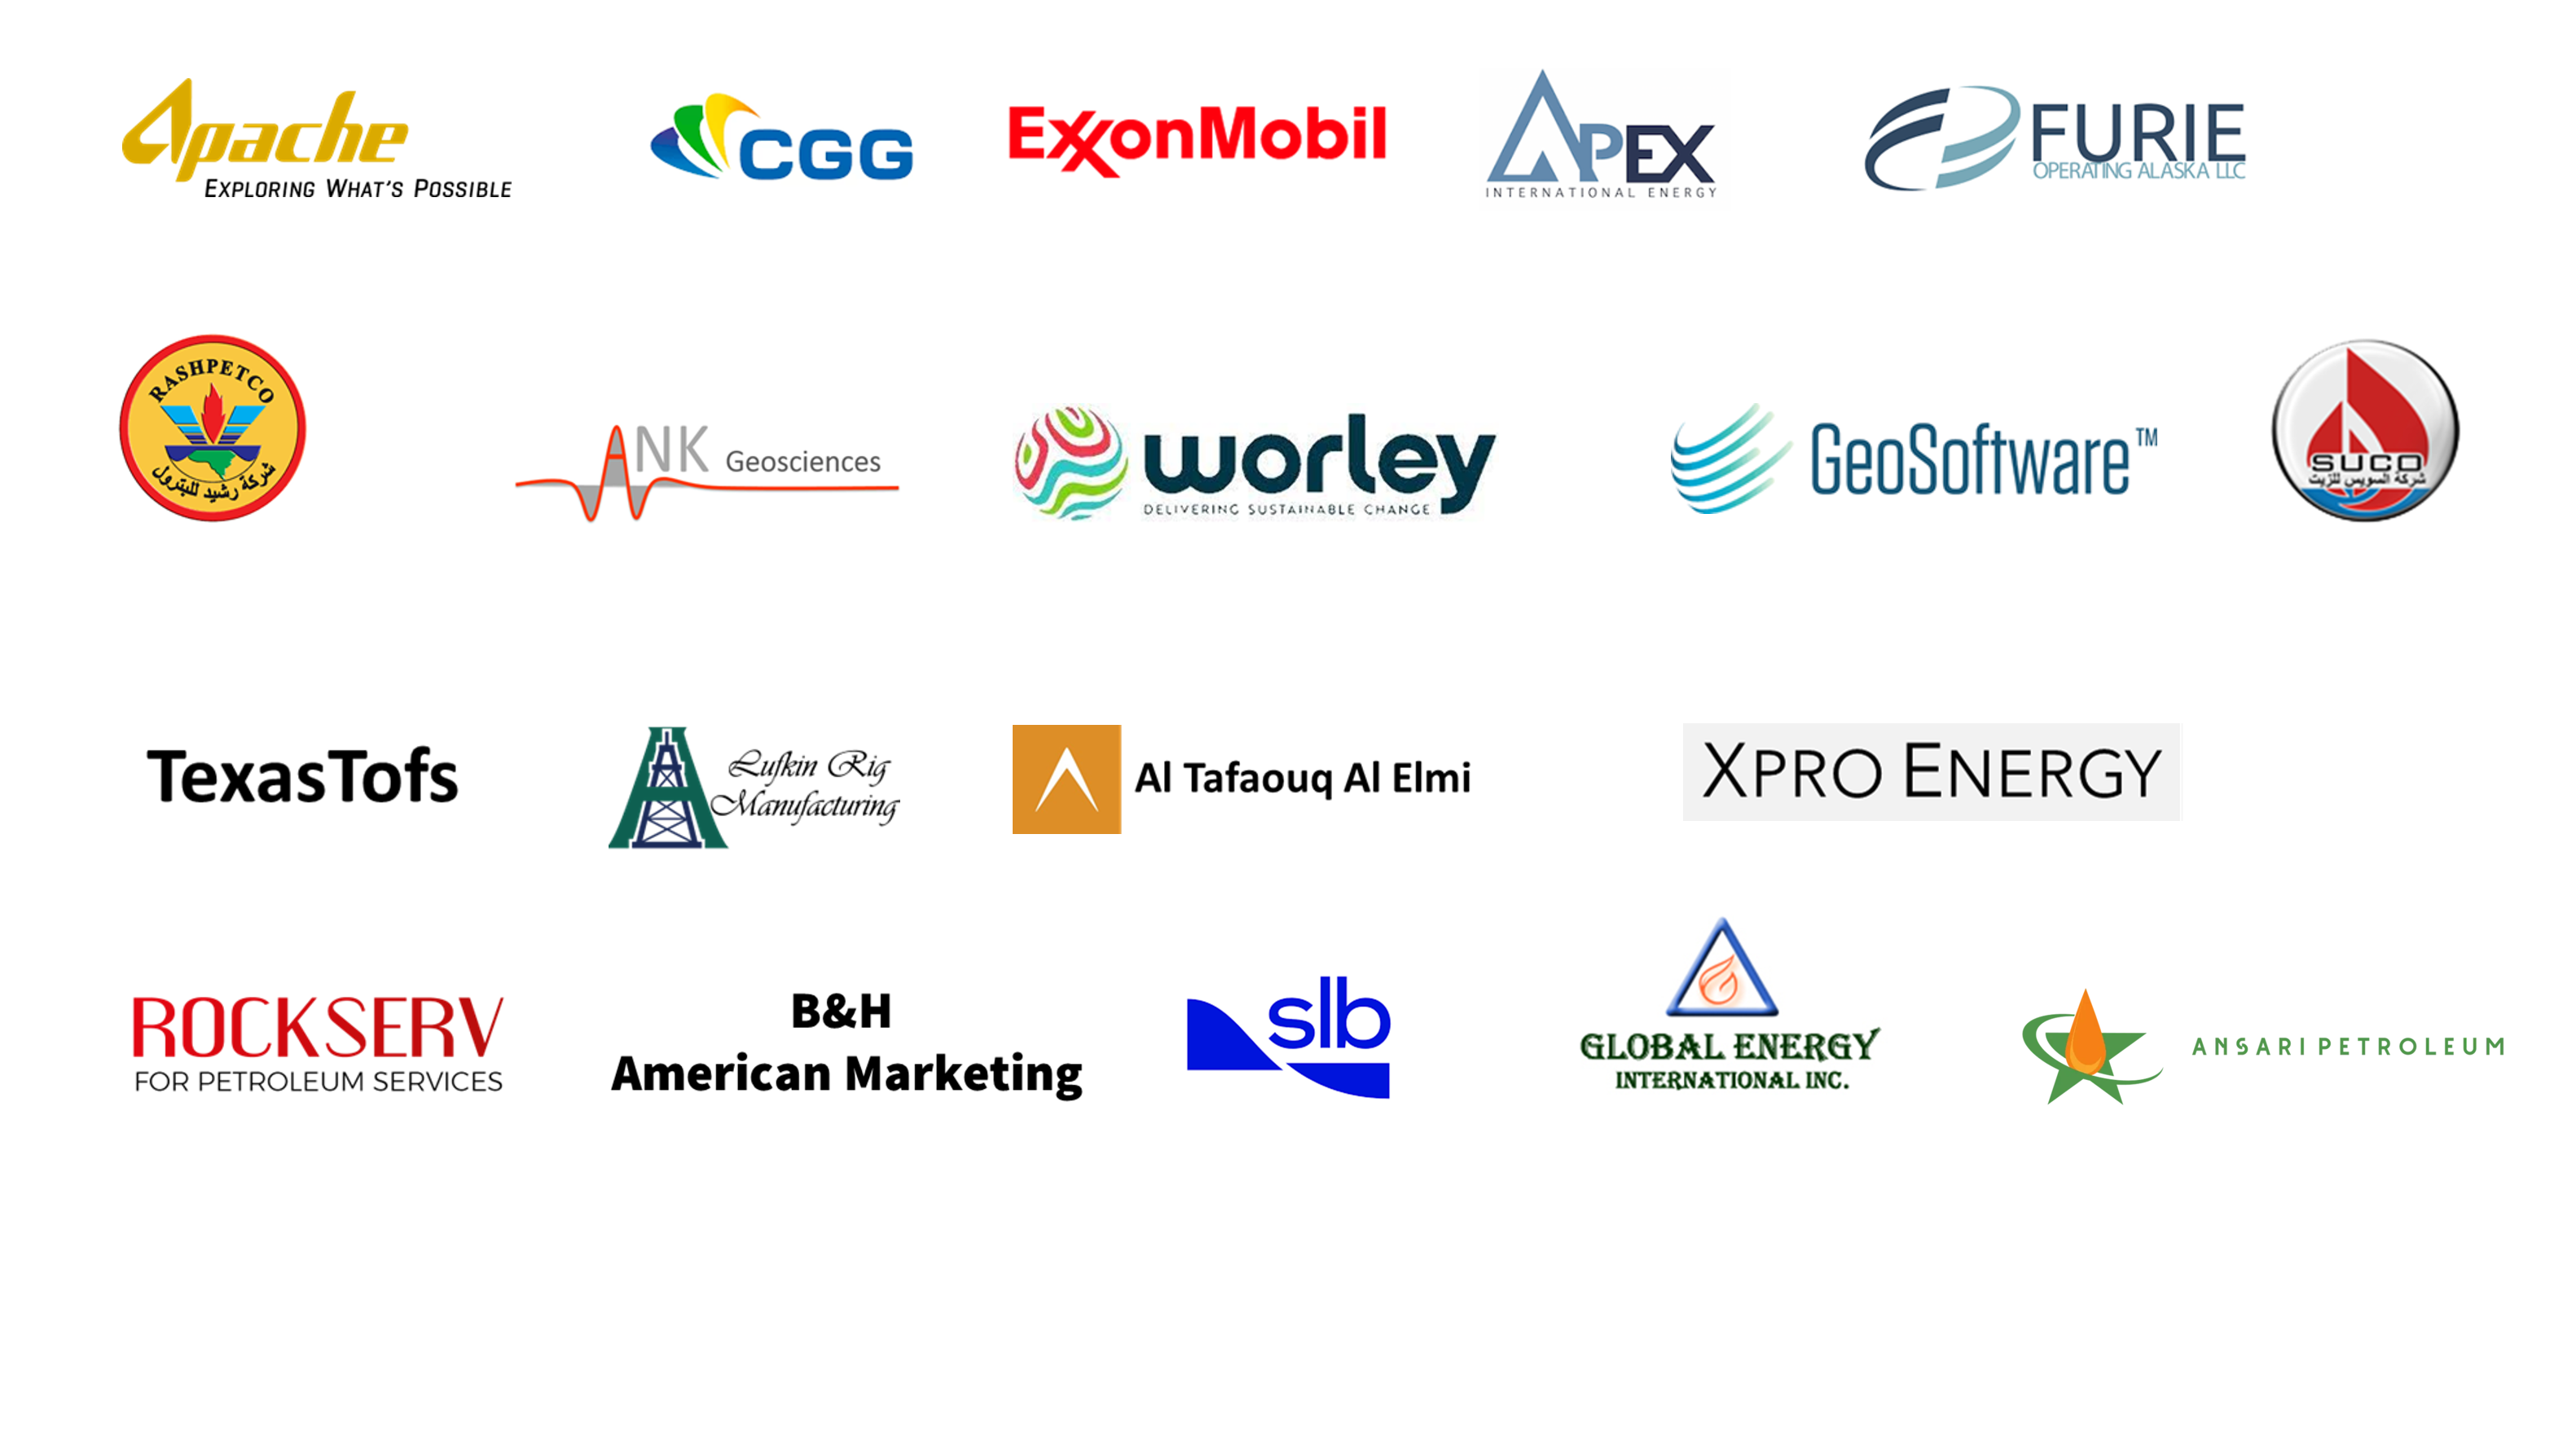 List of Logos for Clients for NeuEra Energy